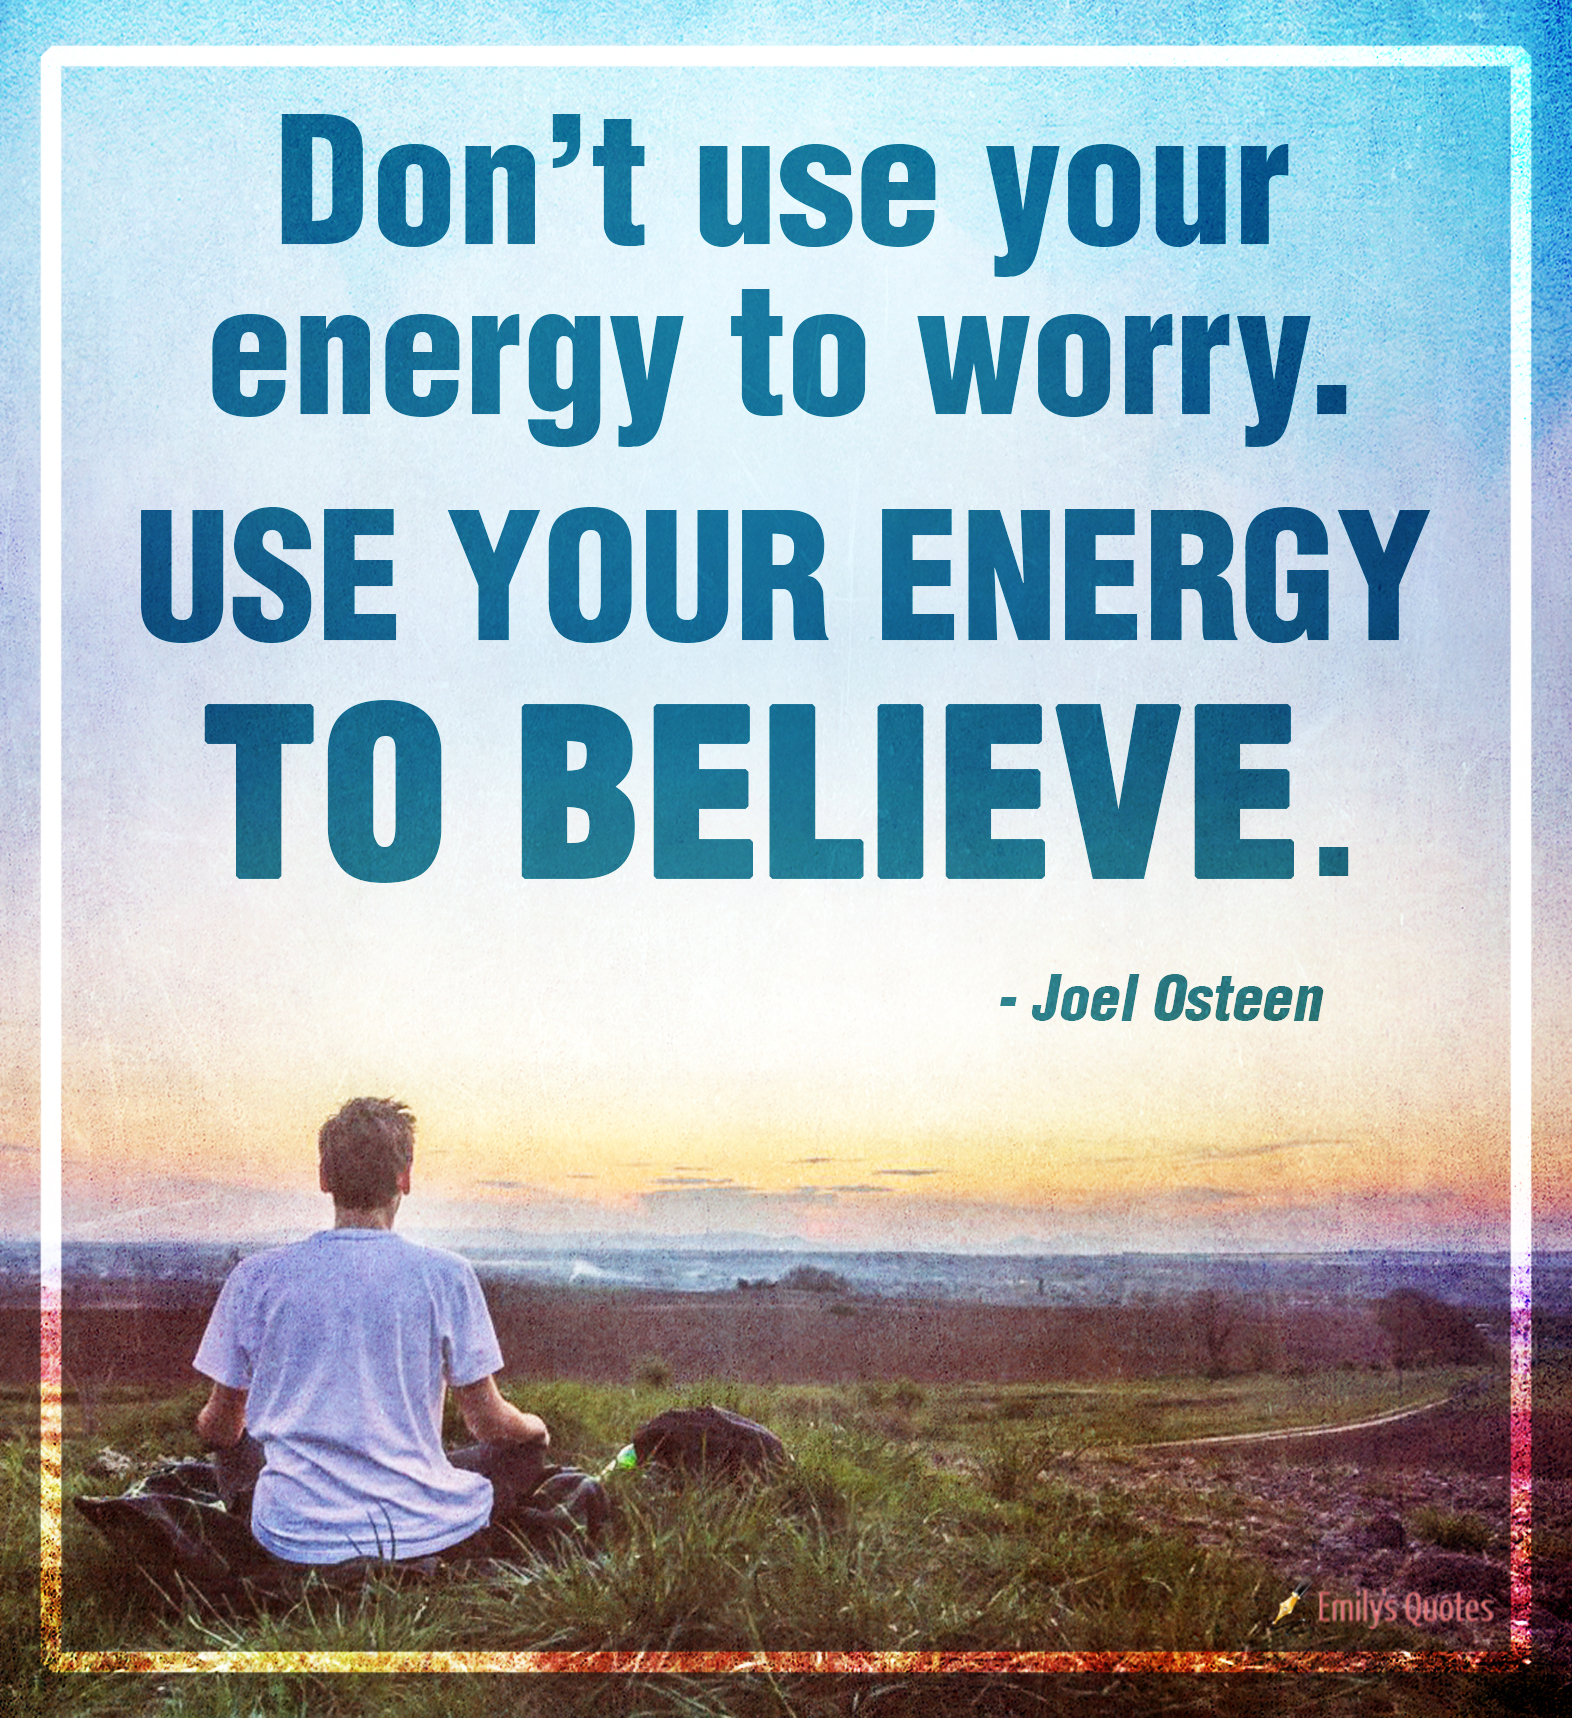 Don’t use your energy to worry. Use your energy to believe